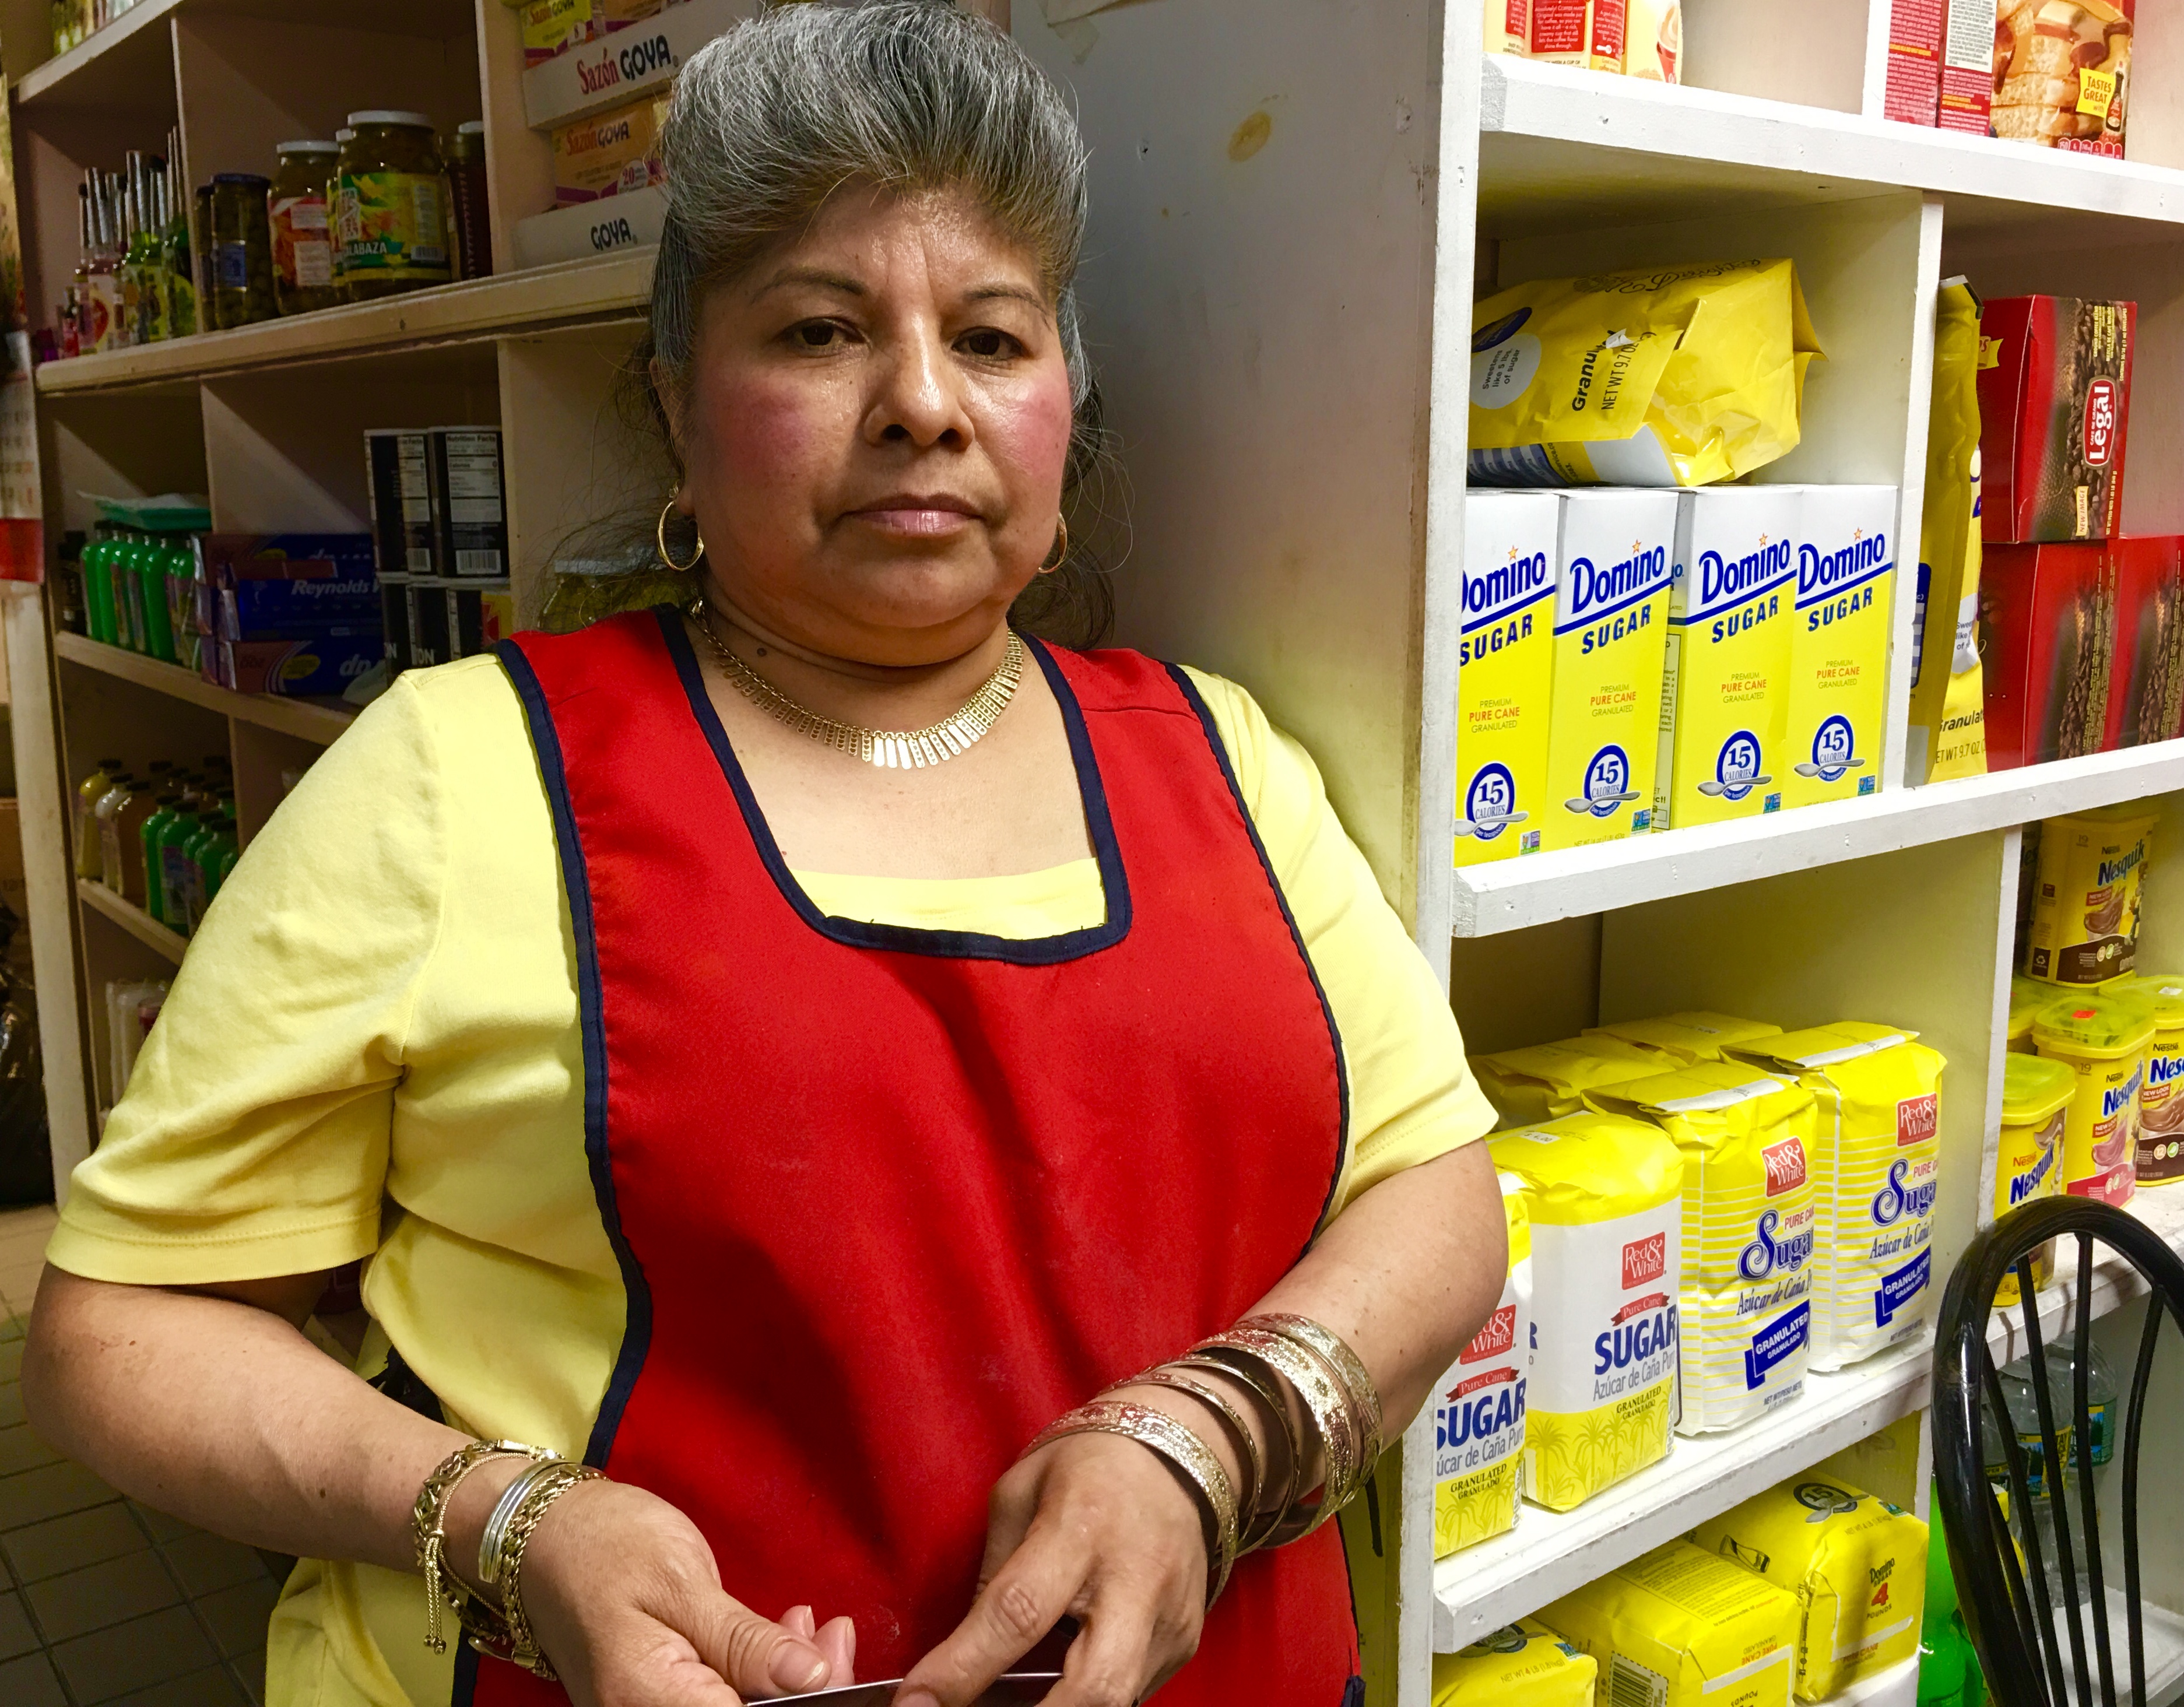 Meet Luisa Zenteno, who owns La Flor de Santa Ines, a Mexican bakery and grocery on Church Avenue. Eagle photo by Lore Croghan